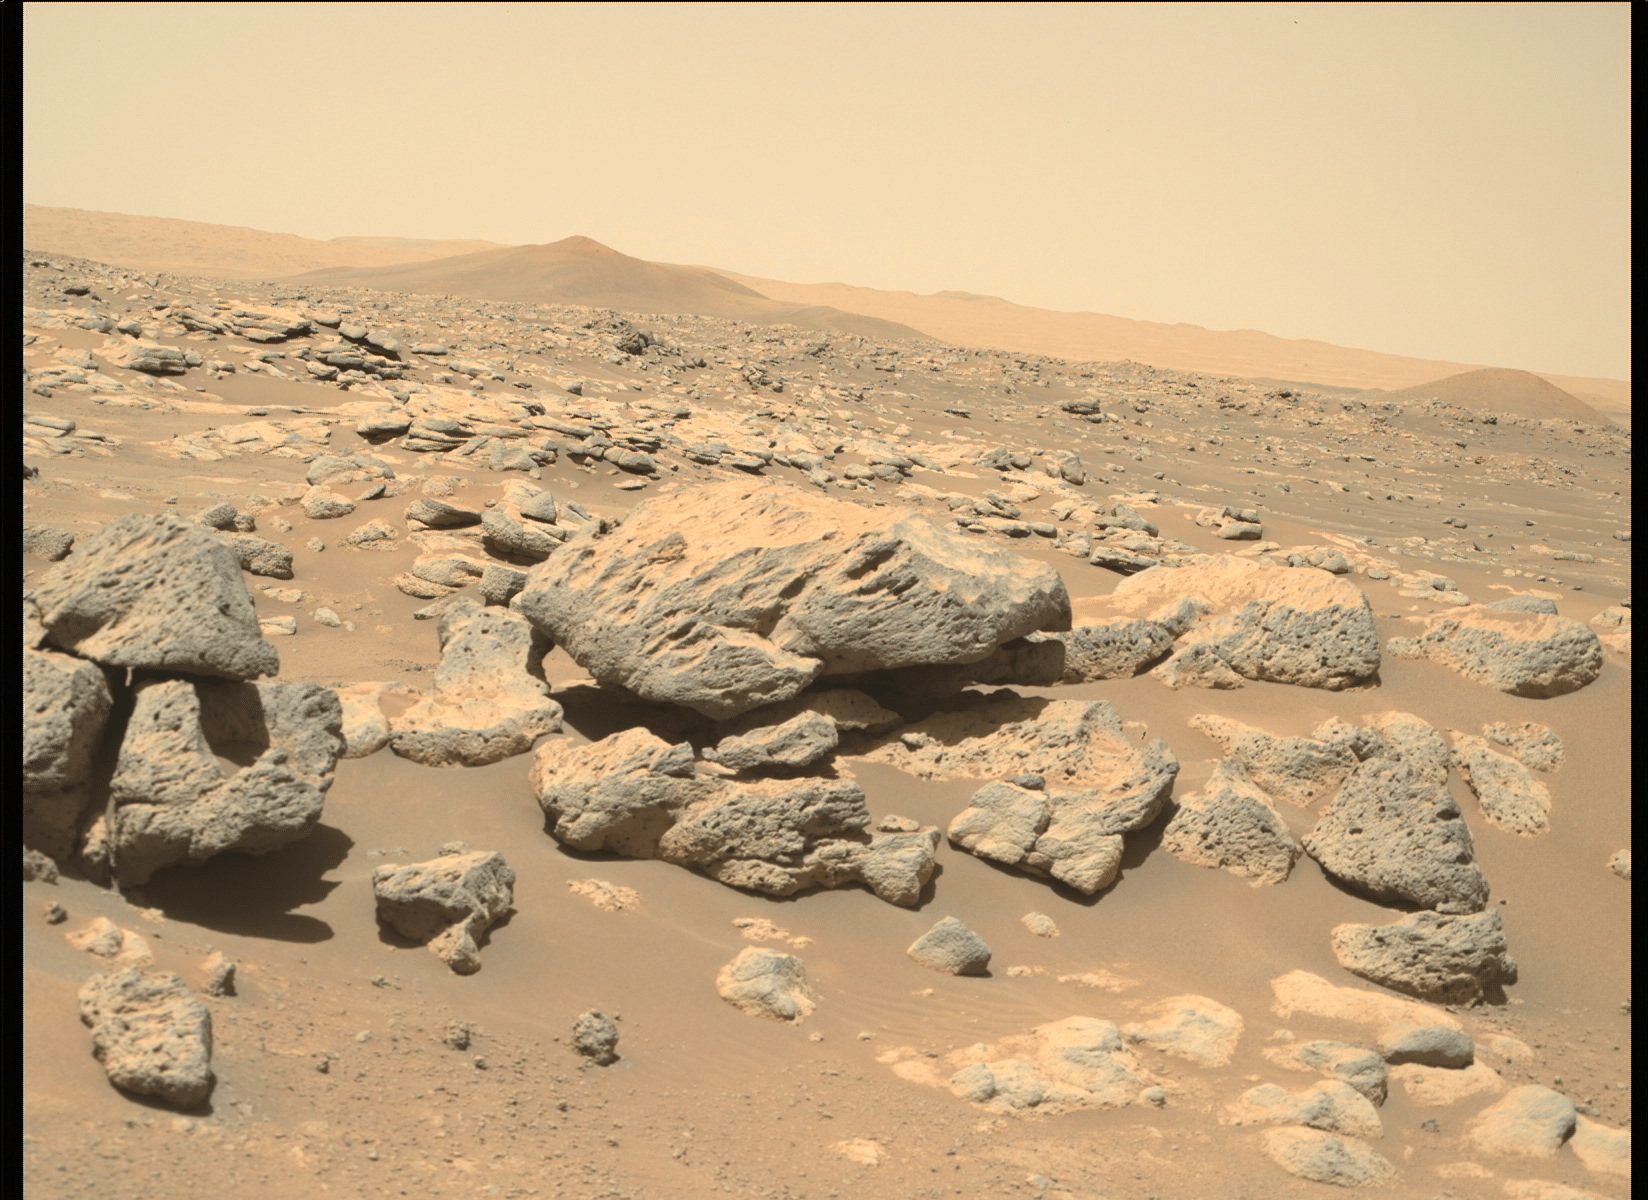 Photo taken on November 18, 2021 by Mastcam-Z.  It's a pair of sensors capable of capturing 3D images - NASA / JPL-Caltech / ASU